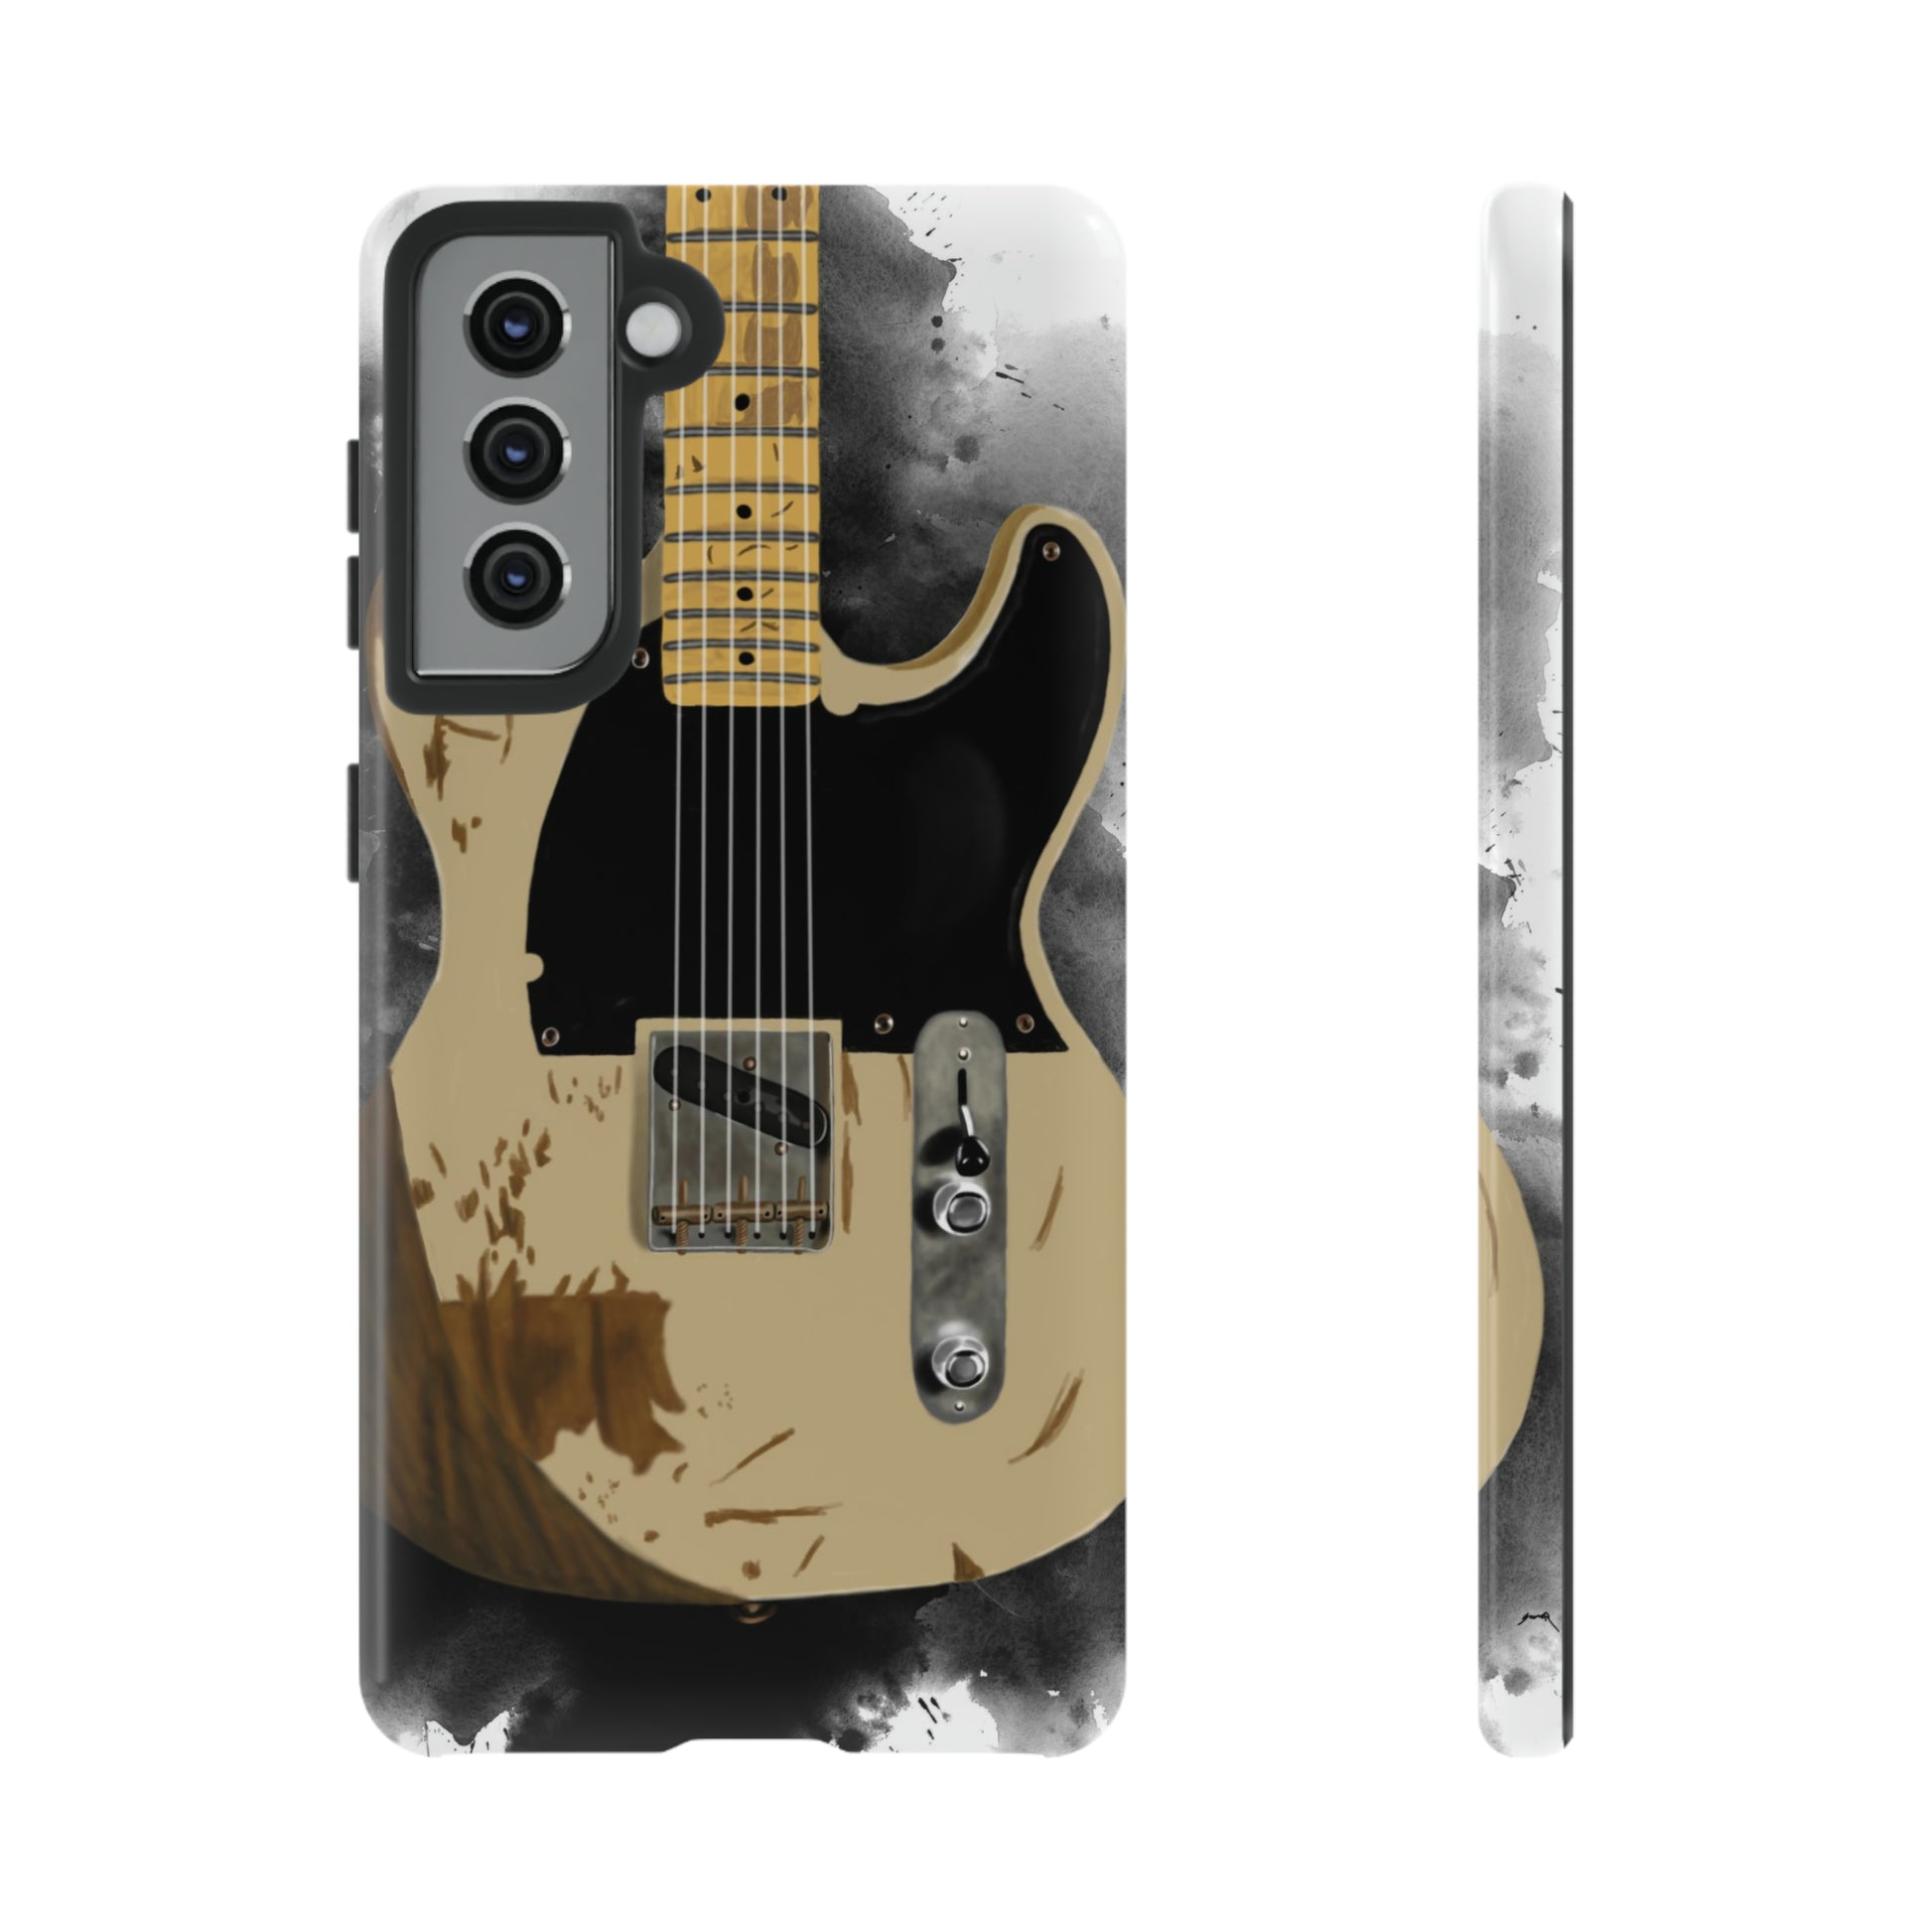 Digital painting of a white-black vintage electric guitar printed on a samsung phone case